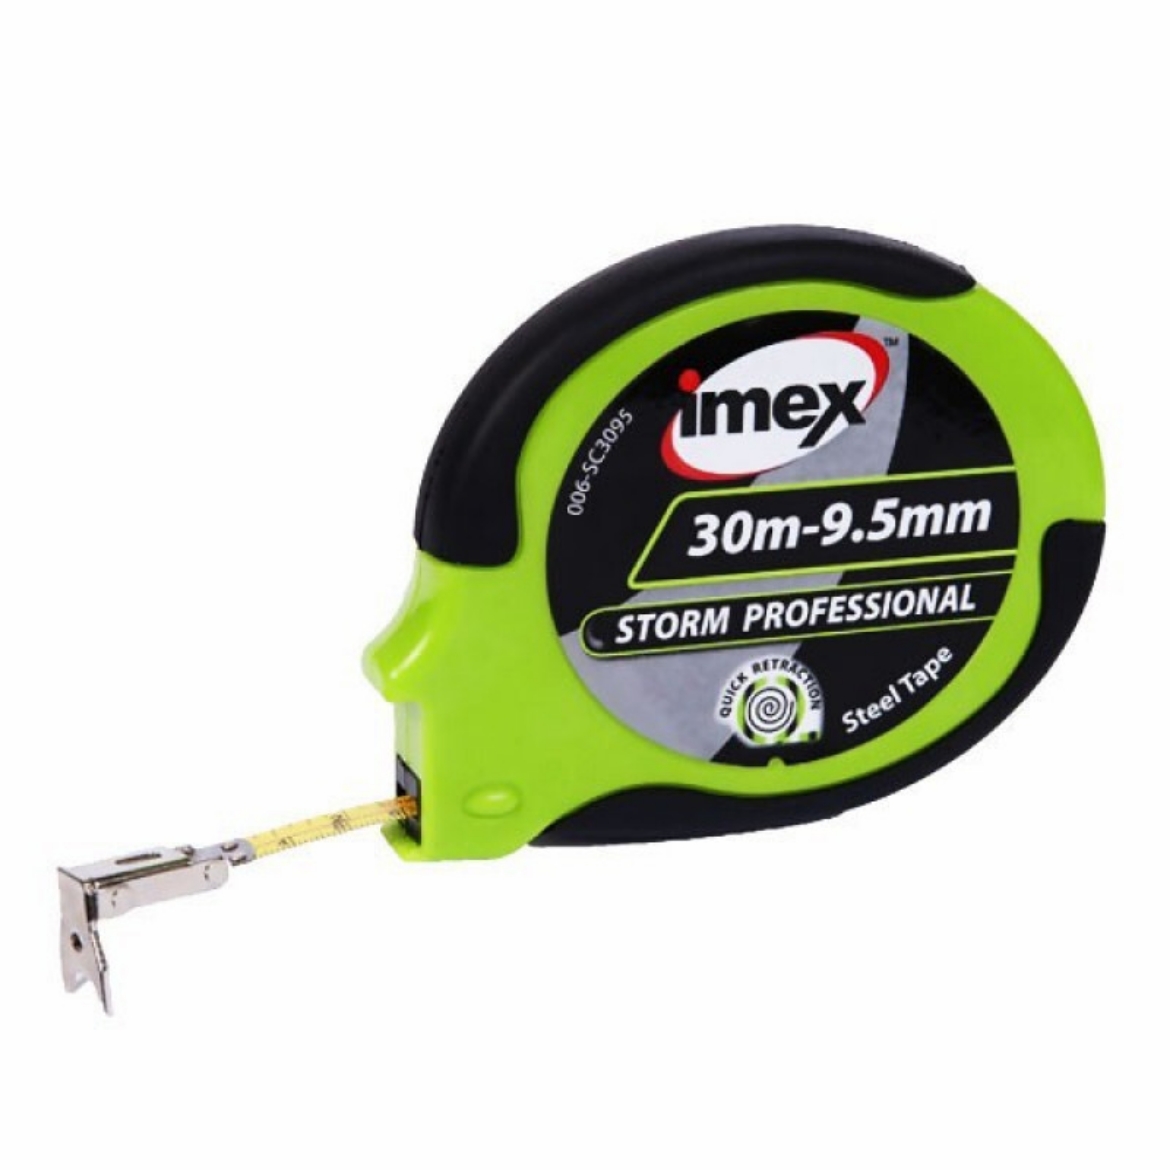 Picture of Imex 30mx9.5mm Steel closed reel Storm Pro tape